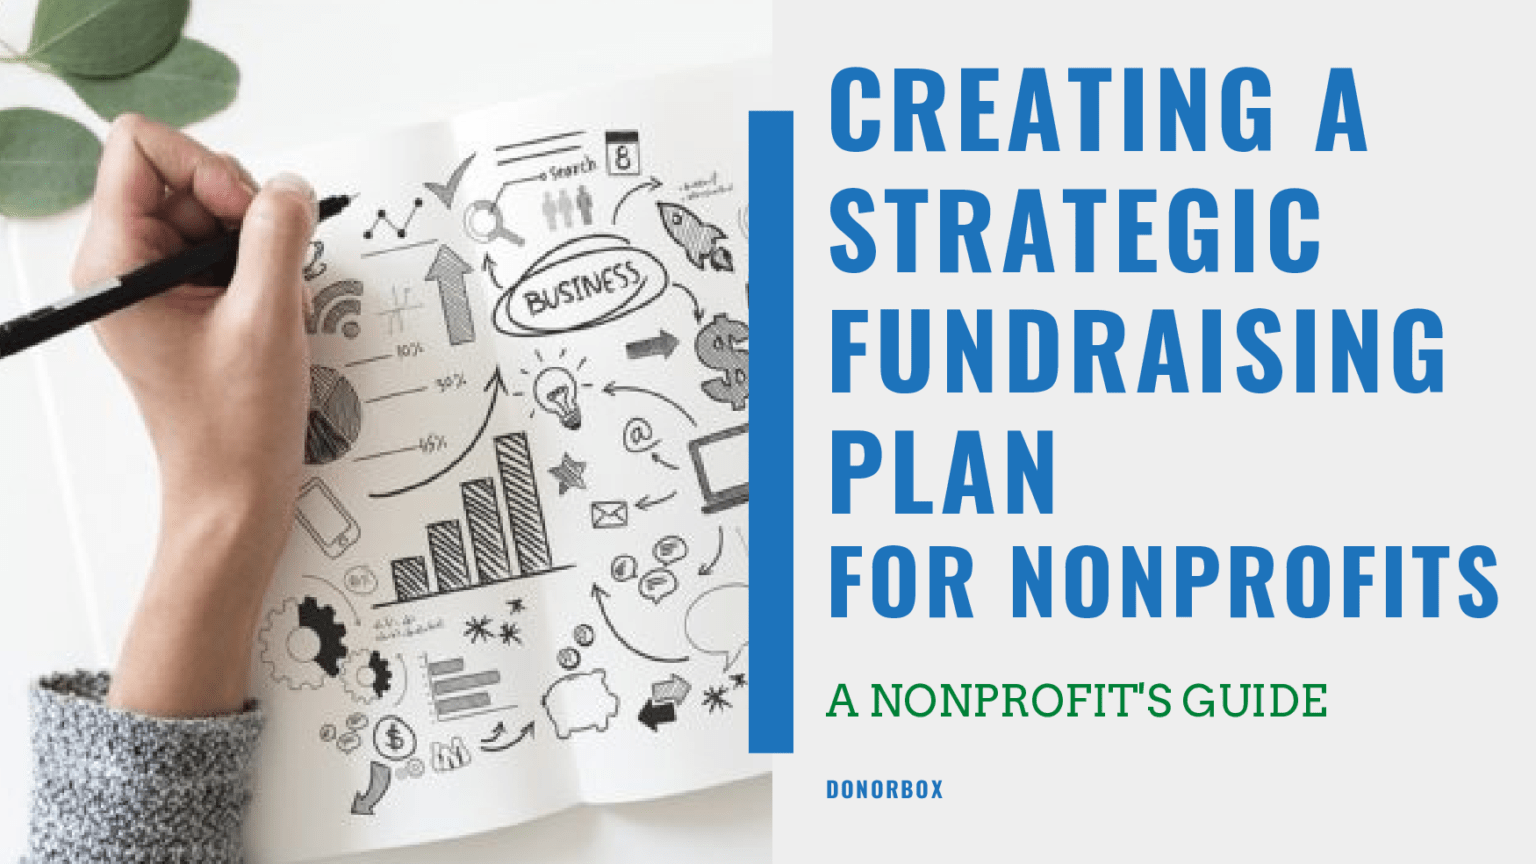 How to Create a Strategic Fundraising Plan for Nonprofits